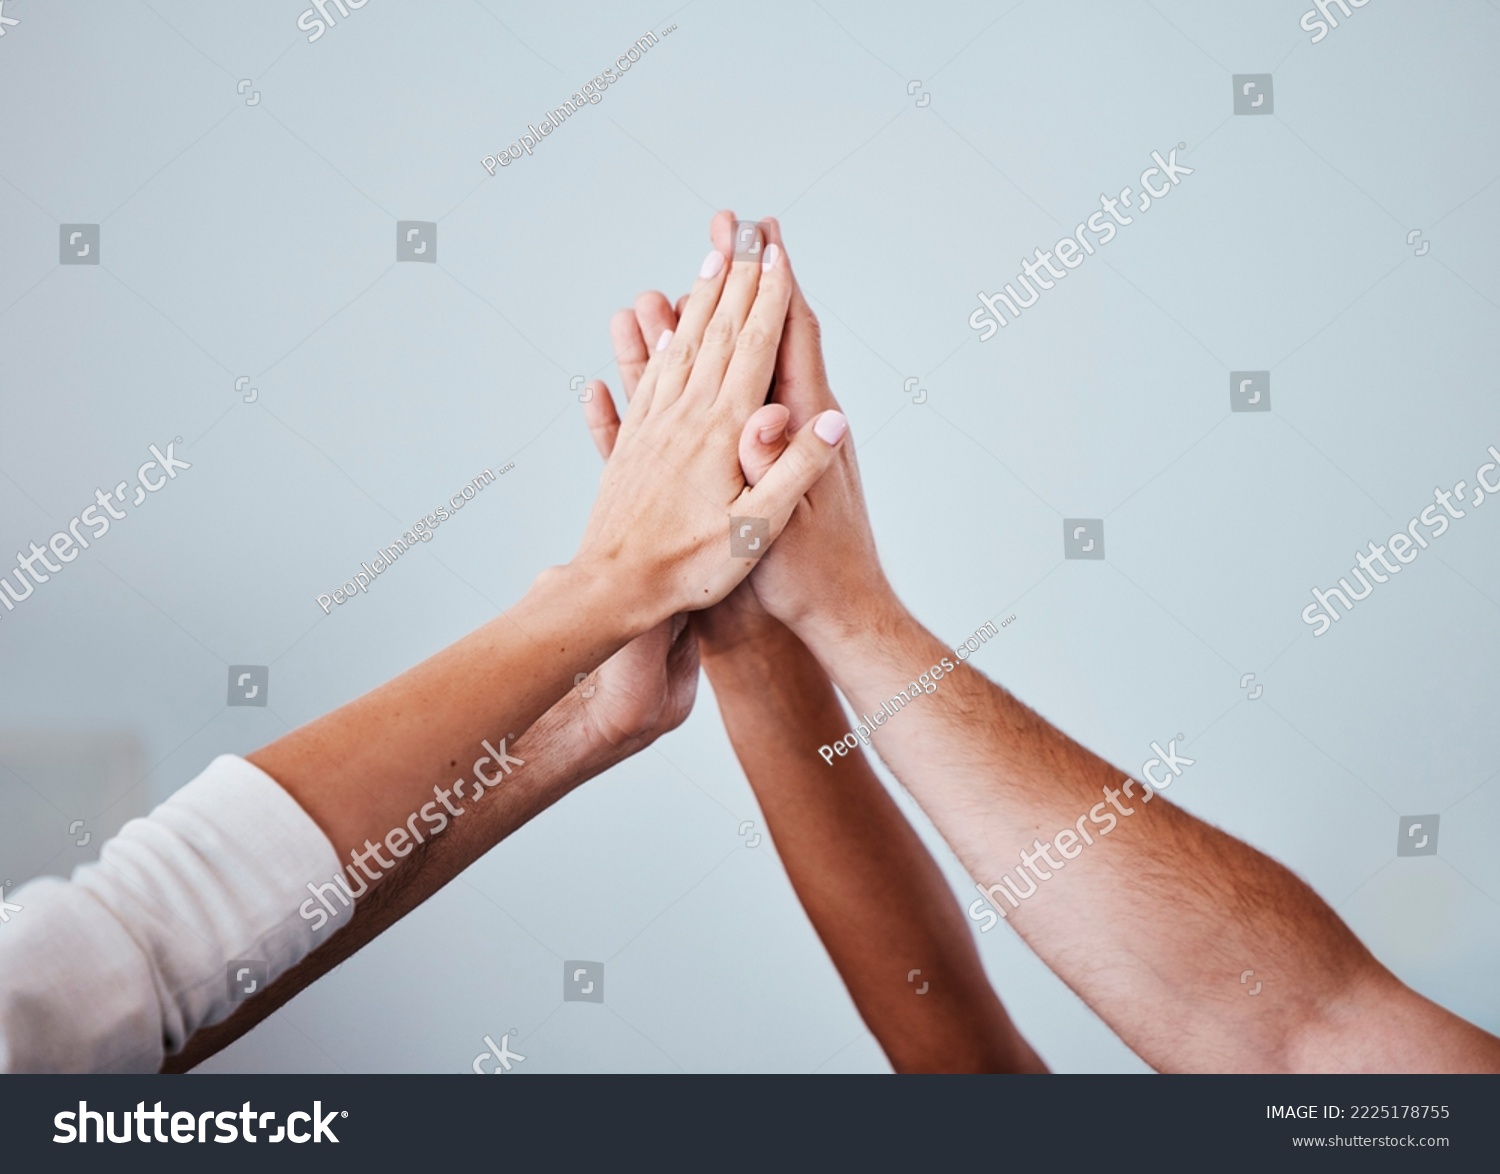 High five, team and hands of people in celebration for teamwork achievement, team building meeting or collaboration. Group solidarity, support and community friends celebrate charity mission success #2225178755